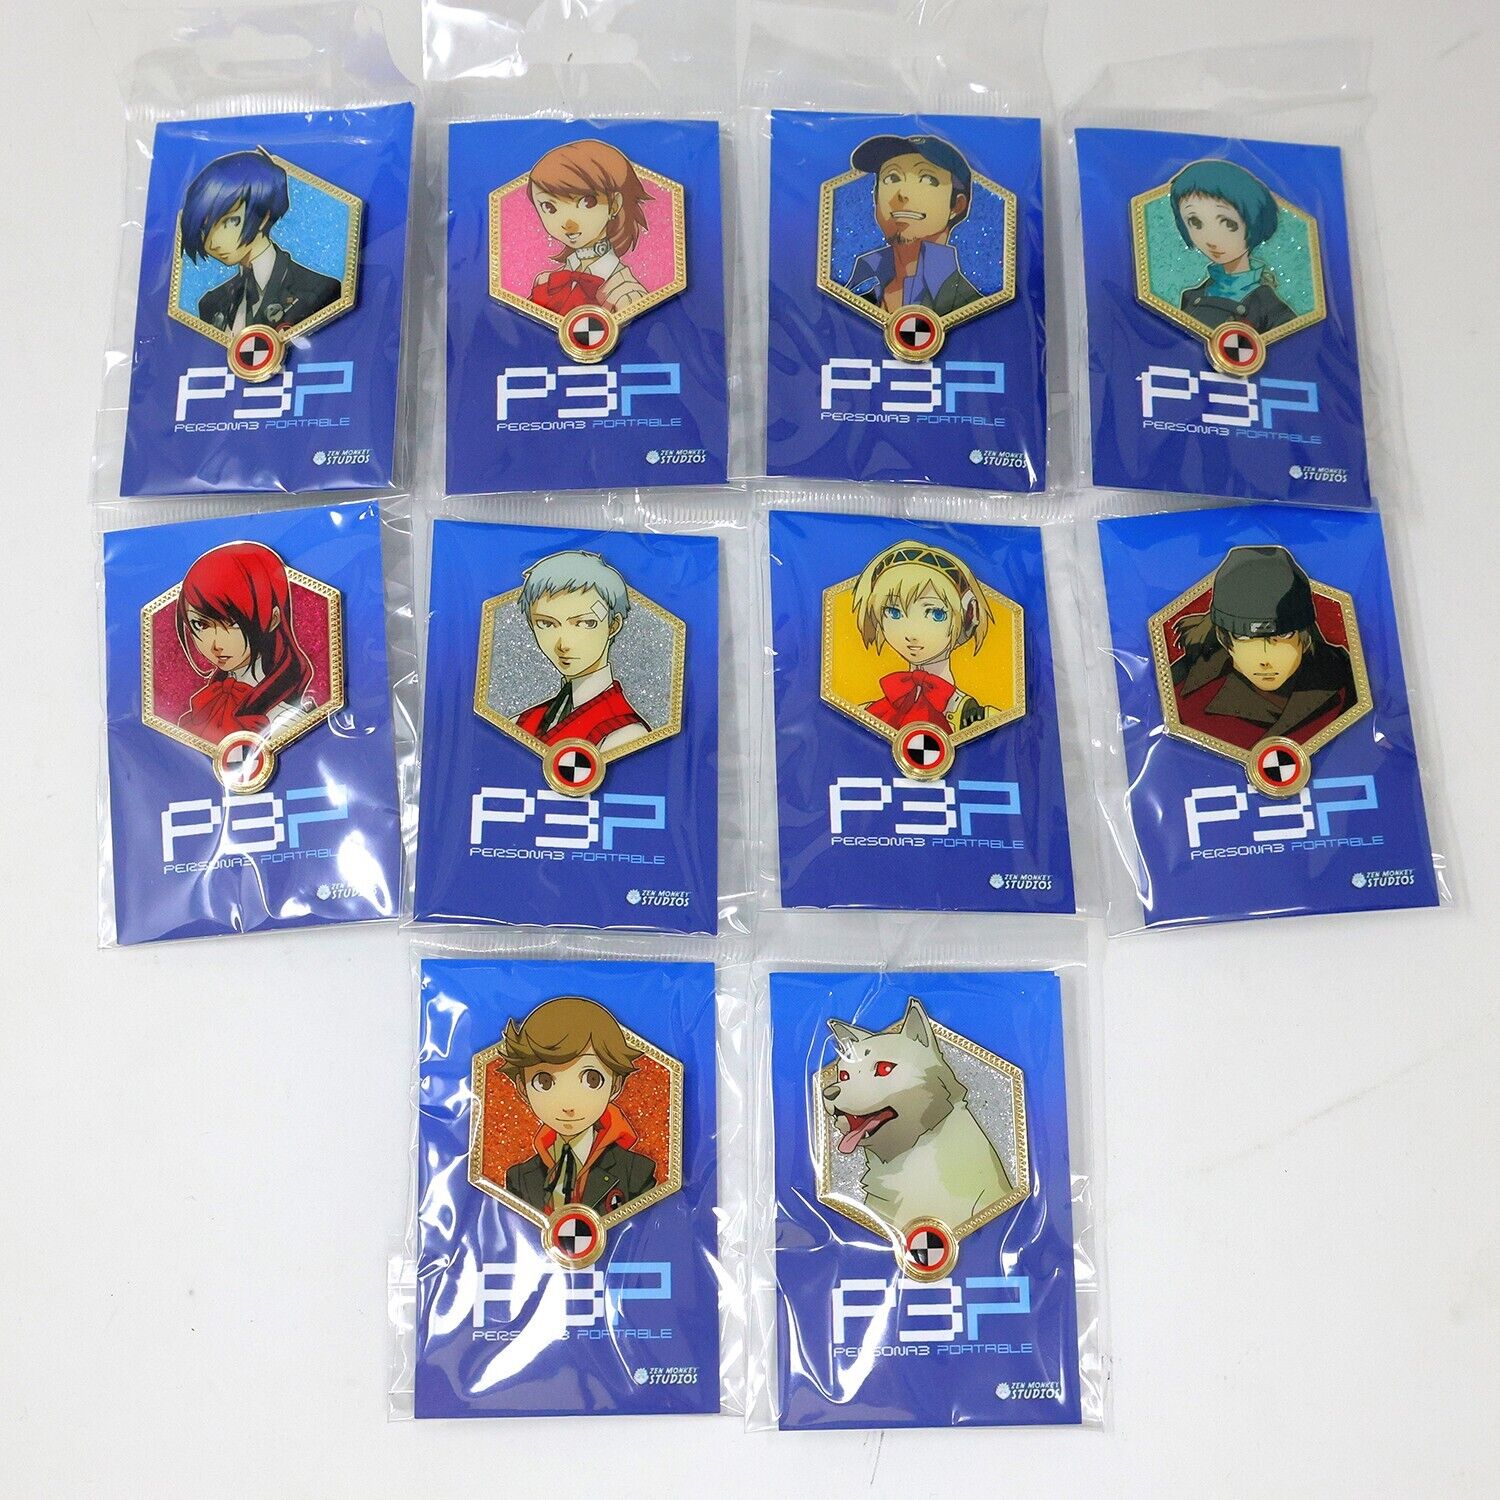 Persona 3 Portable Reload Complete SEES Squad Enamel Pin Set of 10